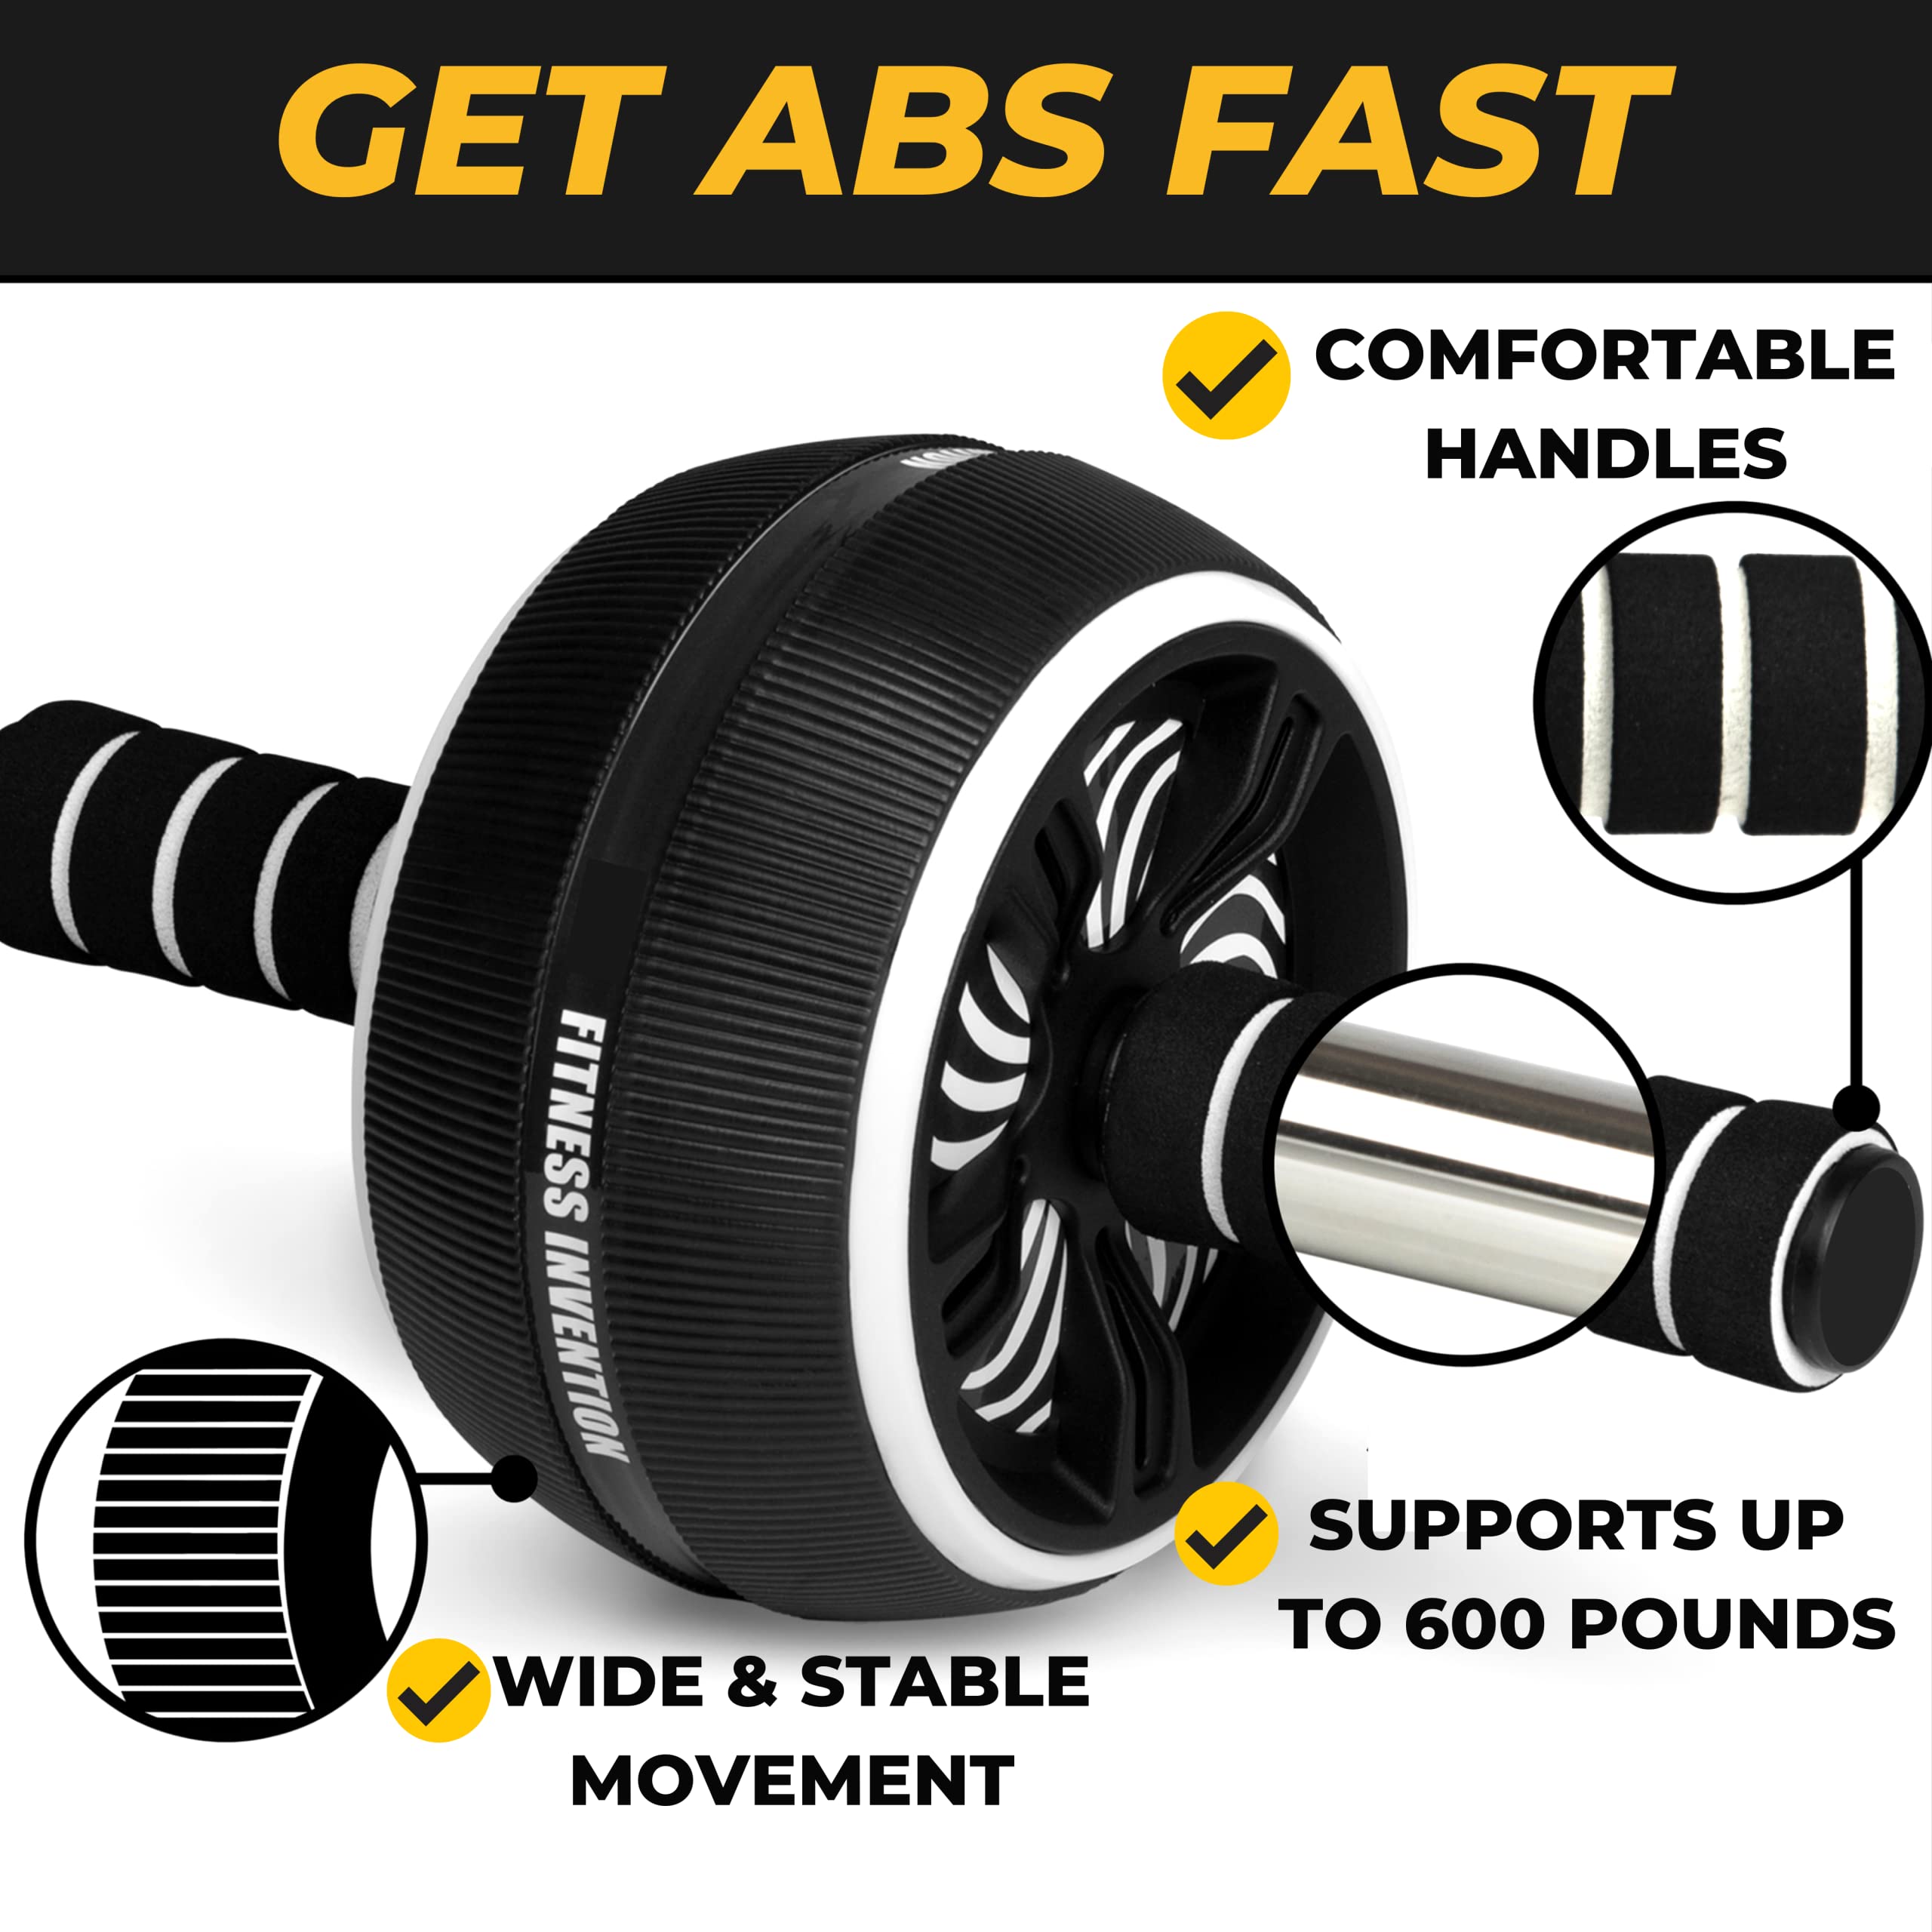 Ab Roller Wheel - 3-In-1 Ab Wheel Roller & Jump Rope - Ab Roller for Abs Workout - Ab Wheel Roller for Core Workout - Rueda Para Abdominales - Abs Roller for Abs Workout - Exercise Wheels for Abs - Workout Equipment for Home Workouts